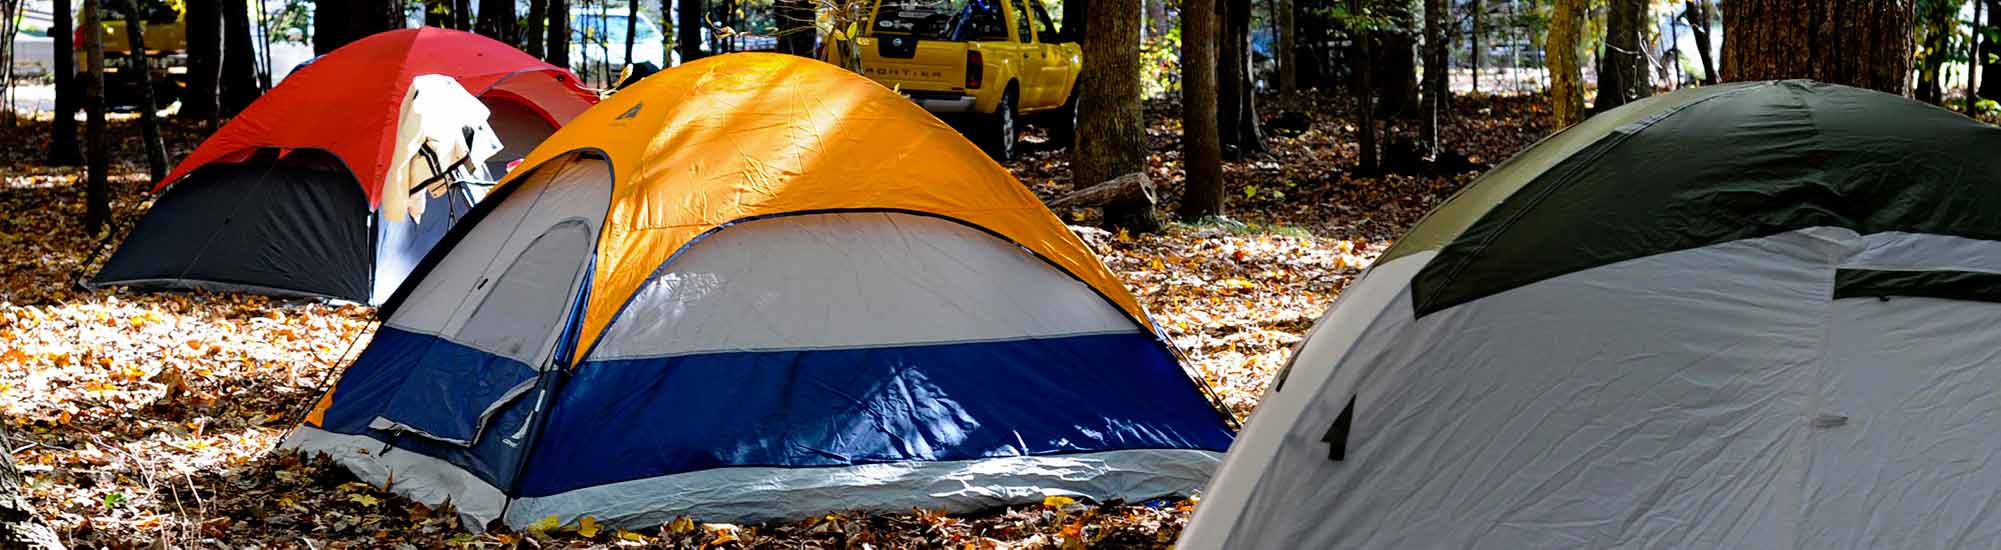 Three colorful tents in a forest.